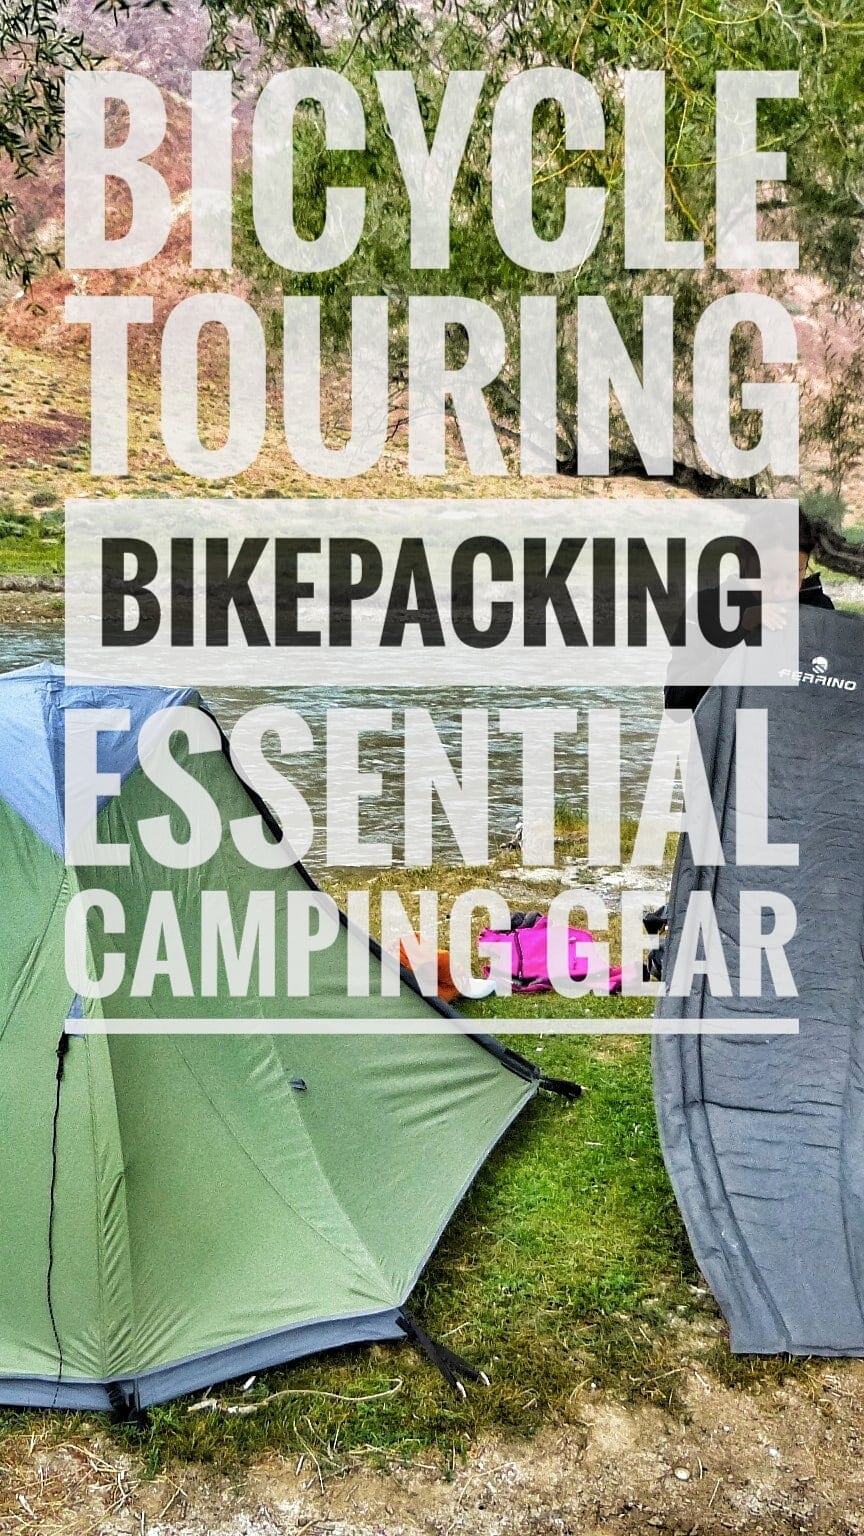 Essential Camping Gear Bicycle Touring Bikepacking